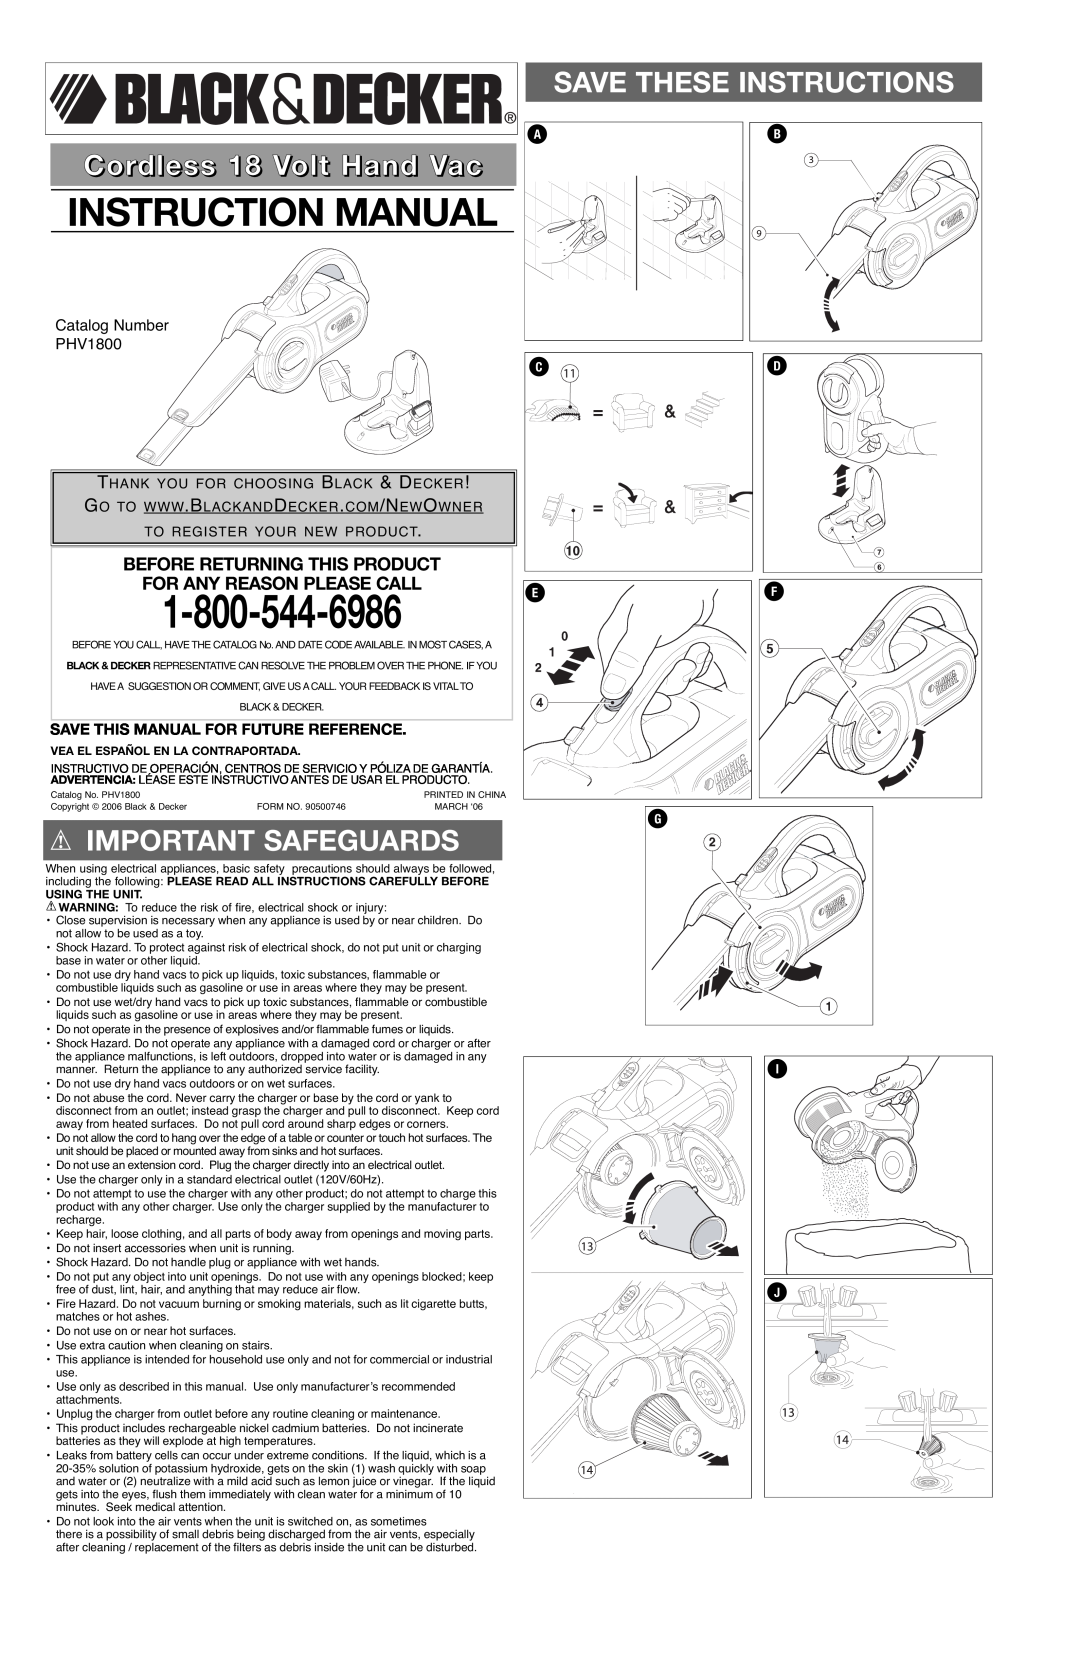 Black & Decker 90500746 instruction manual Instruction Manual, Save These Instructions, Cordless 18 Volt Hand Vac 